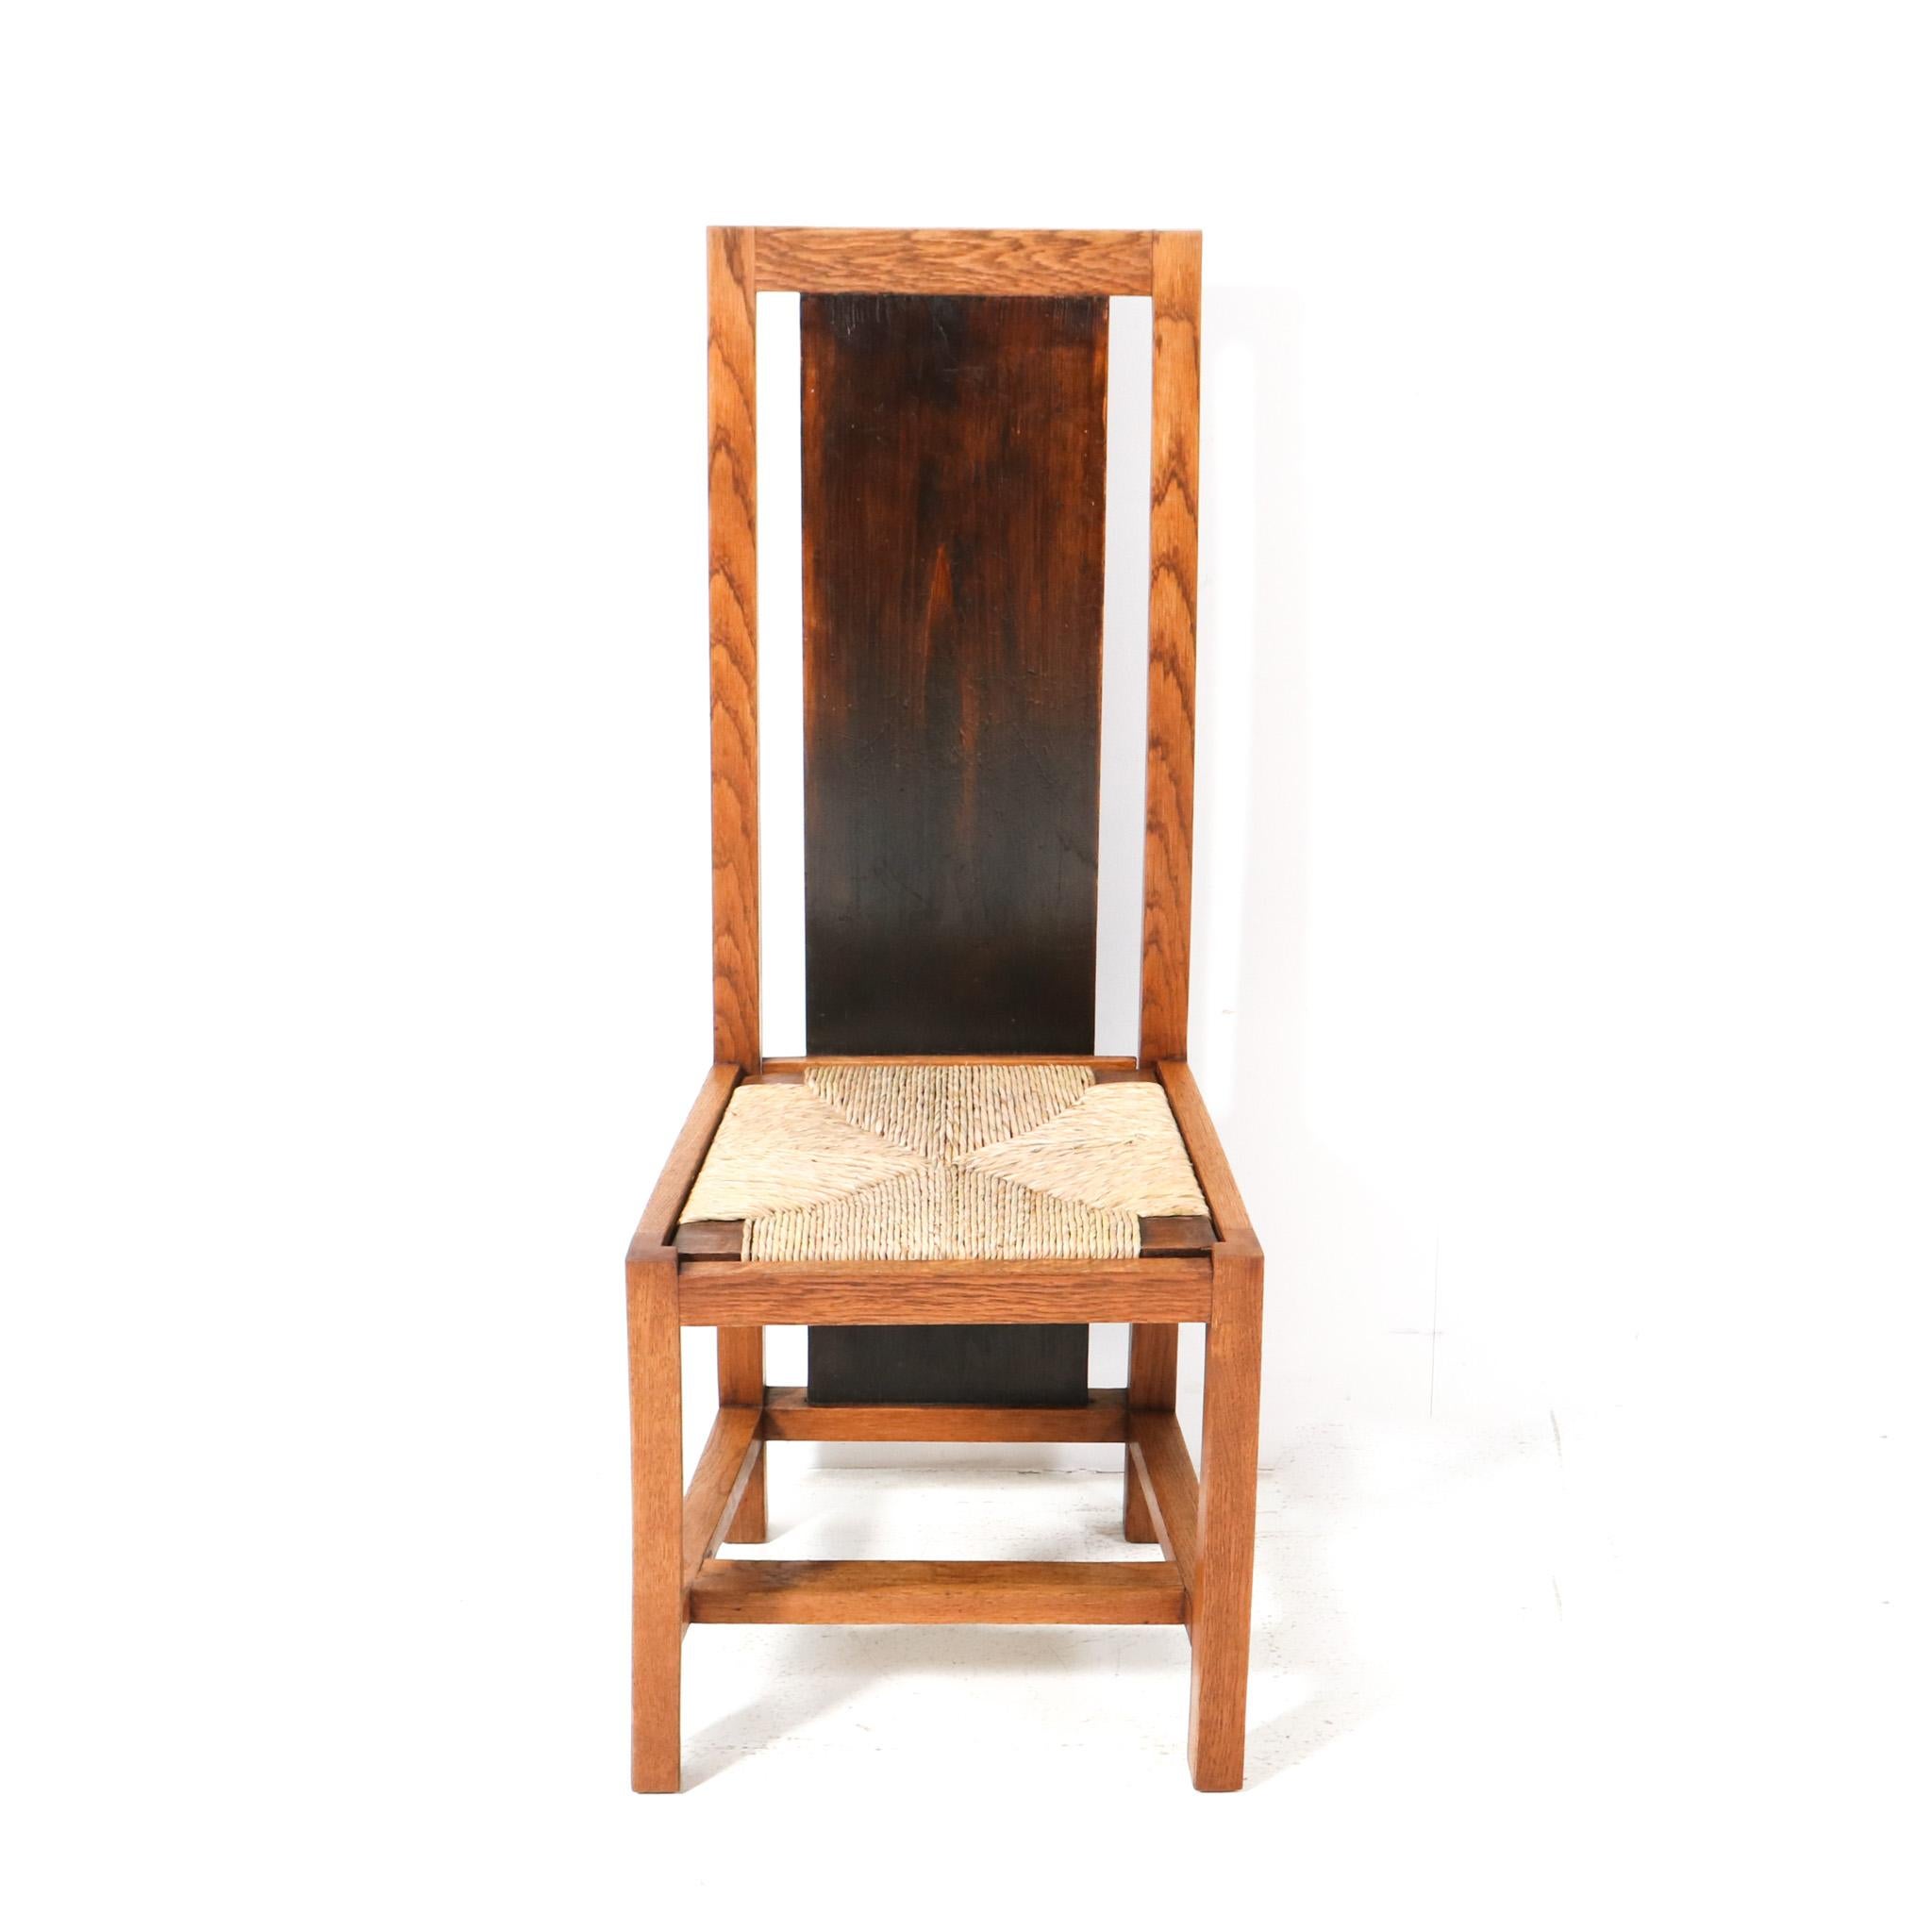 Magnificent and ultra rare Art Deco Modernist high back chair.
Design by Cor Alons.
Striking Dutch design from the 1920s.
Solid oak frame with original dark stained back.
The rush seat has been renewed.
A real eye-catcher for your home or office.
In